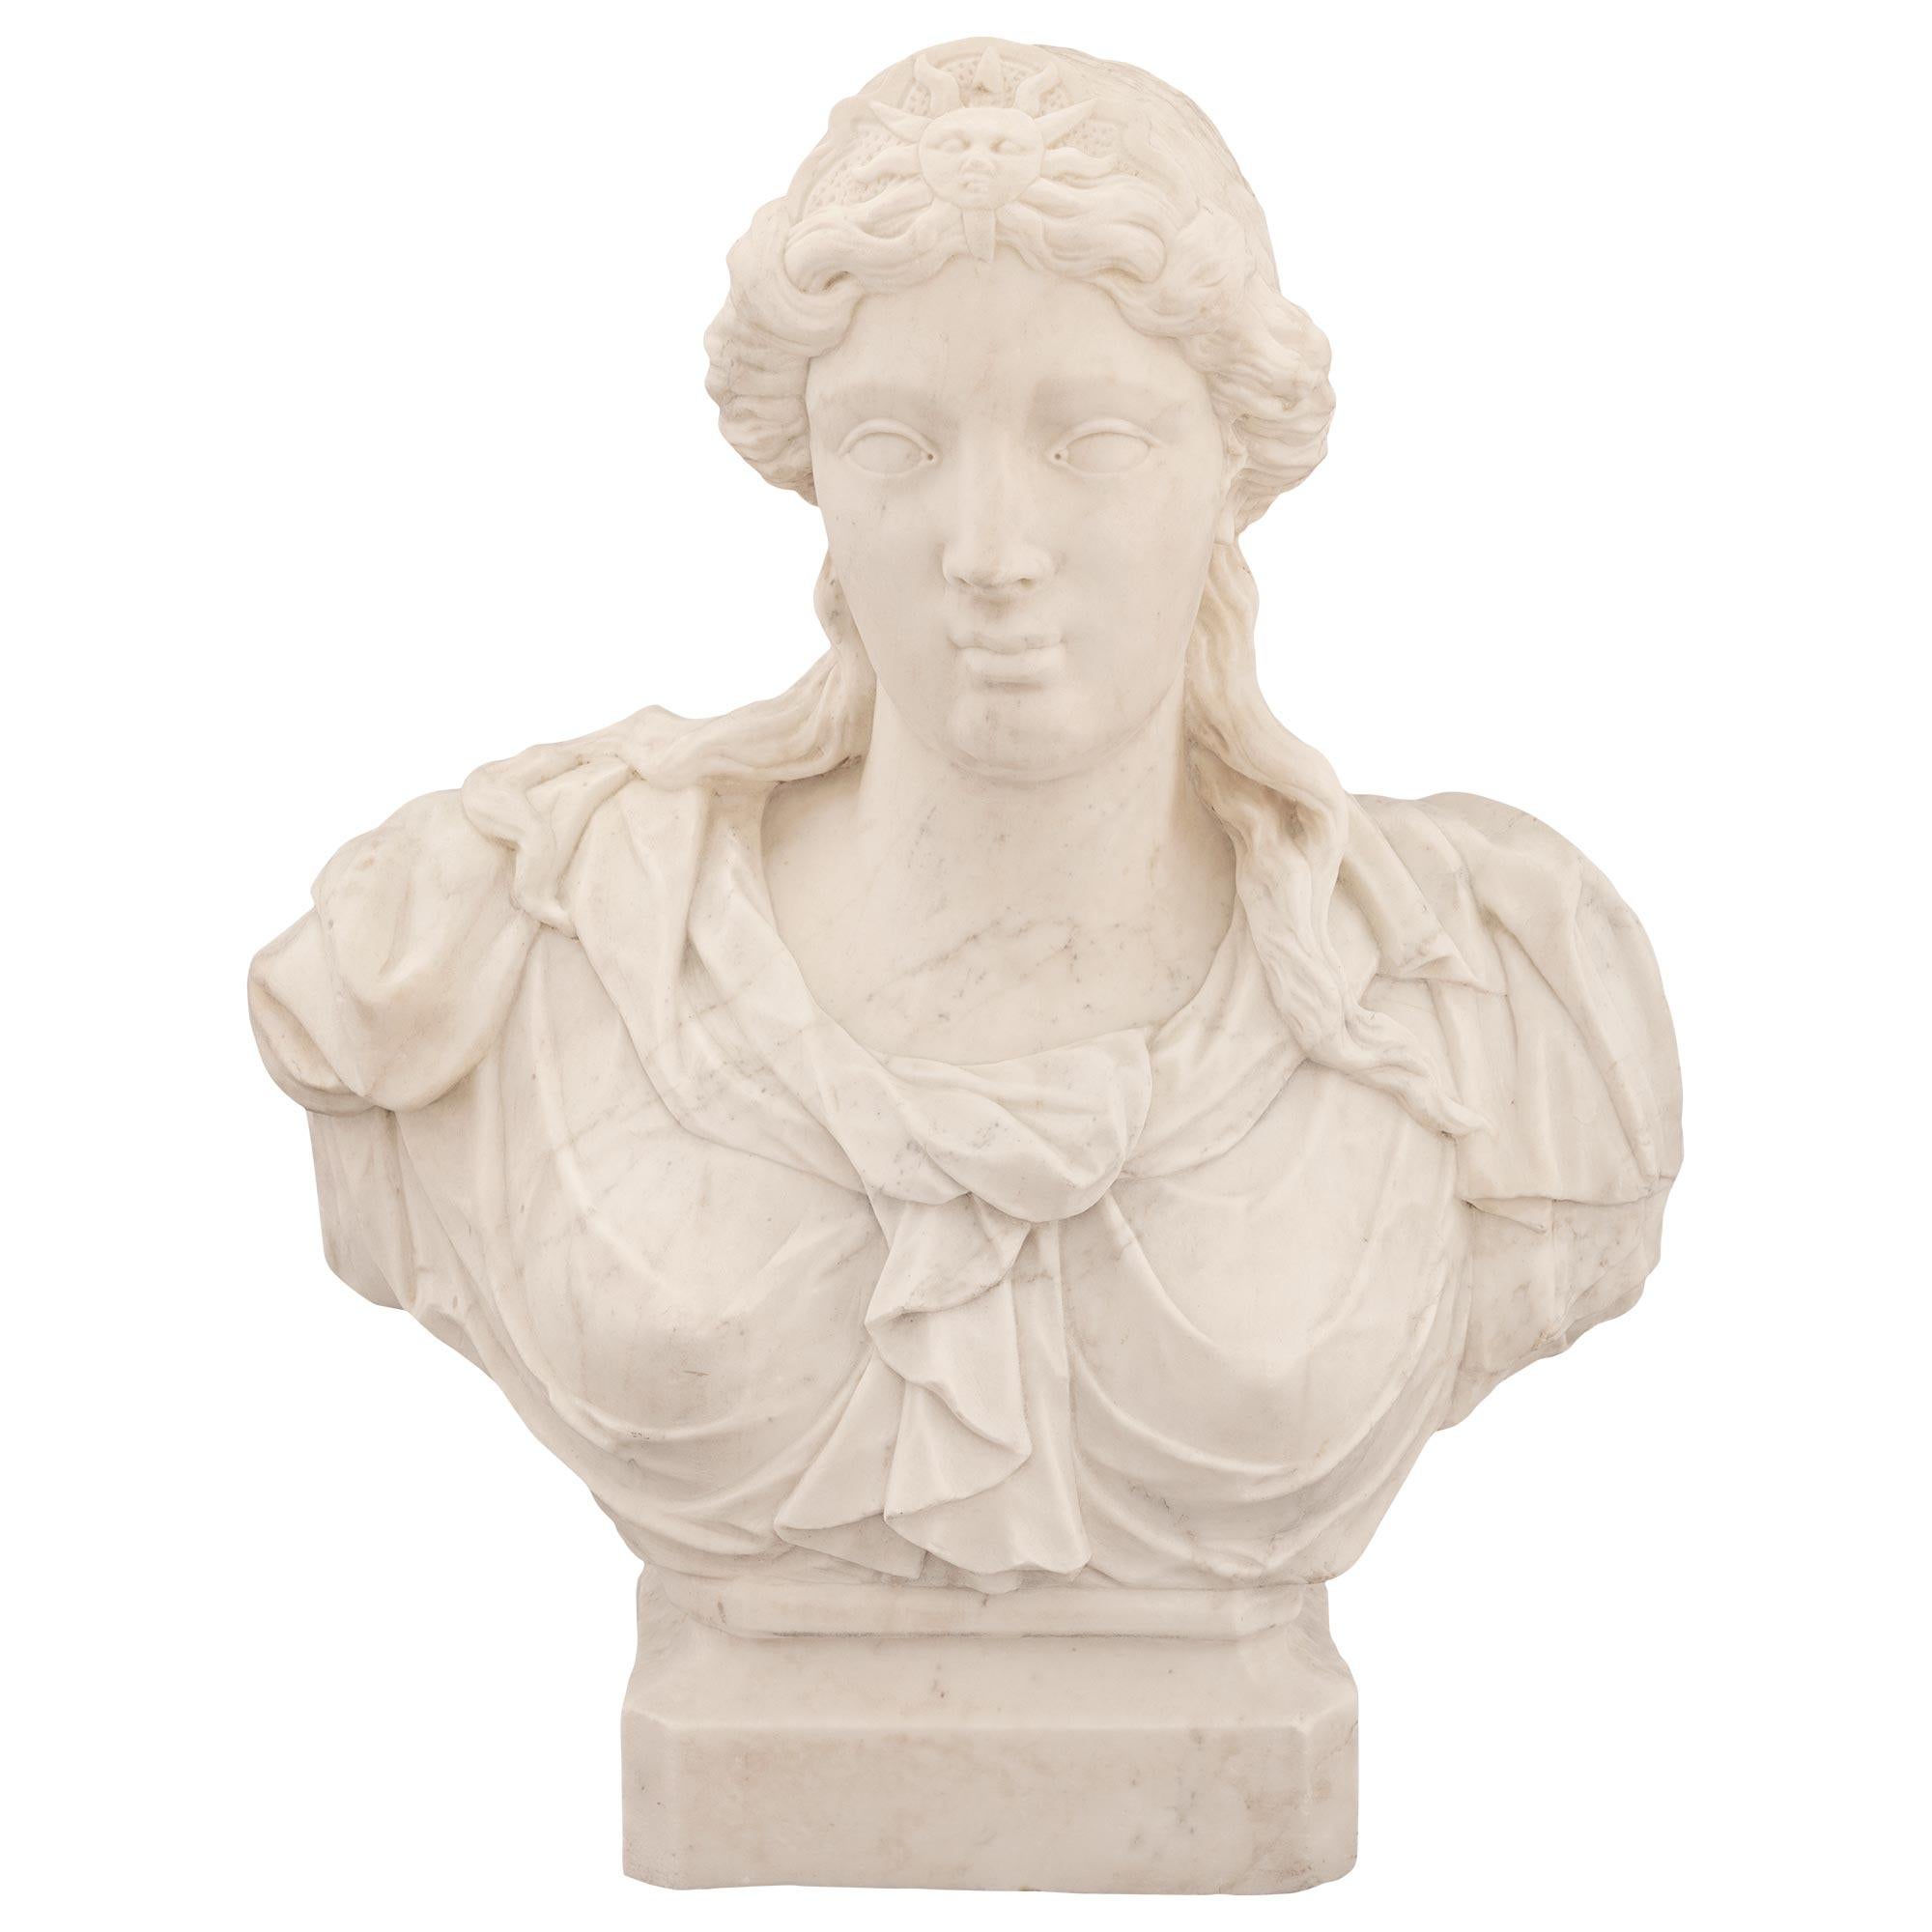 An impressive and very high quality Italian late 17th / early 18th century white Carrara marble bust of Athena. The bust is raised by a rectangular base with cut corners and a fine wrap around mottled border. Above is the beautiful richly sculpted